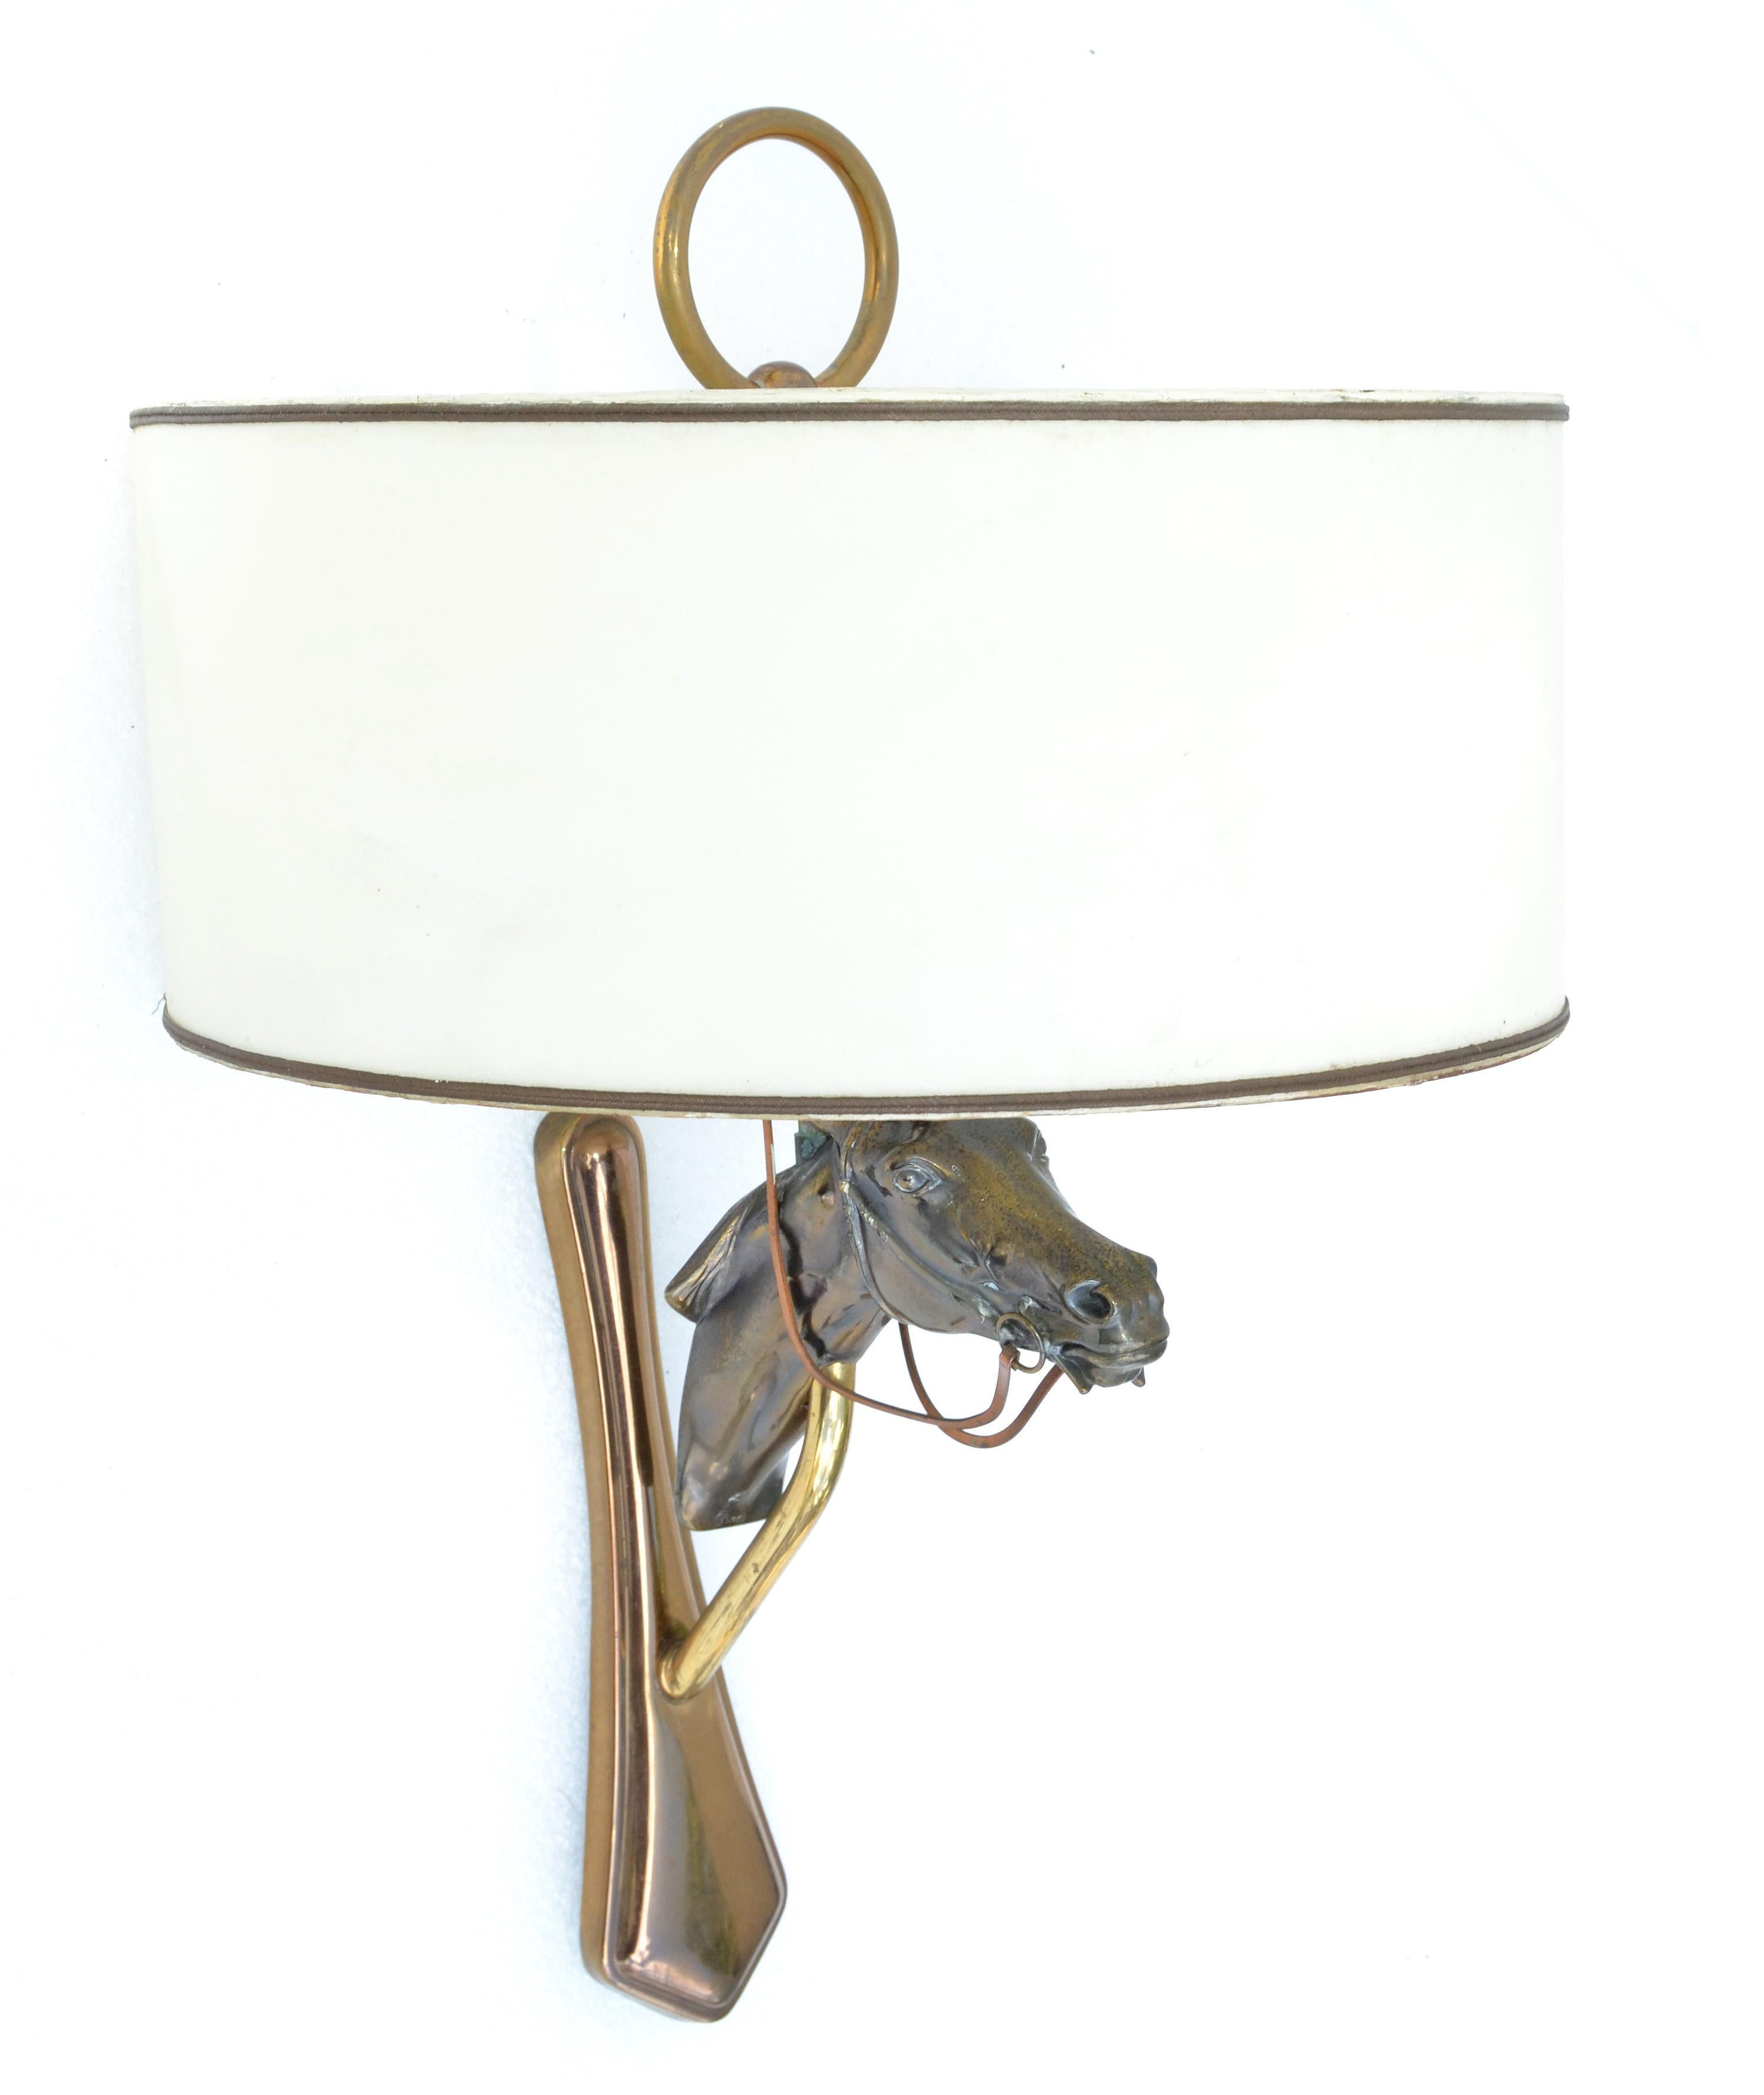 Jacques Adnet style neoclassical bronze horse head sconce, wall light, lamp with form fit original shade.
In perfect working condition and takes 2 light bulb max. 40 watts, or LED bulb.
Brass back plate measures: 9 x 2.5 inches.
Shade measures: